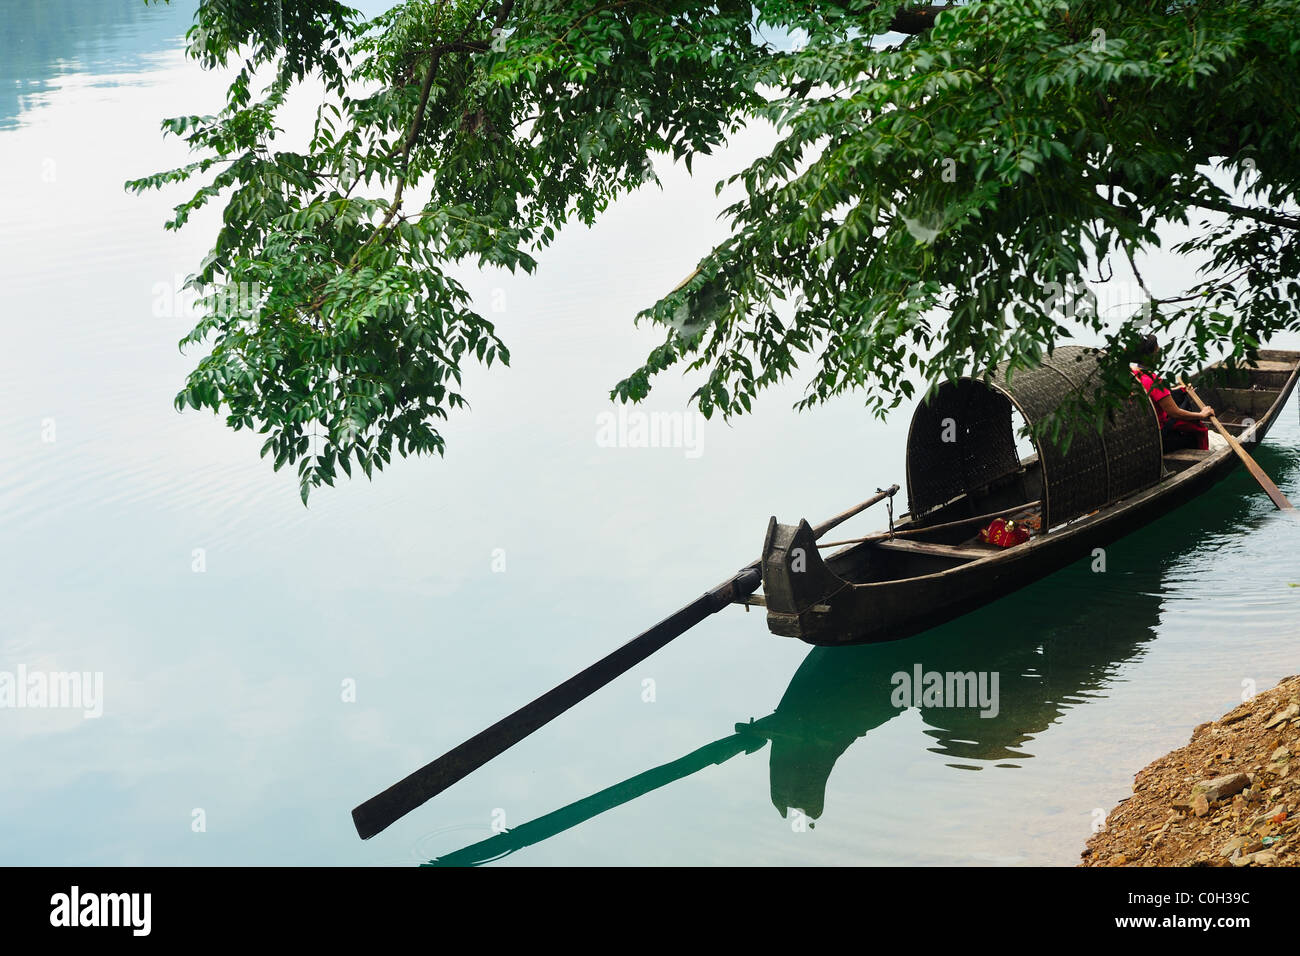 Fishing boat on the river under the tree in Hunan province of China Stock Photo